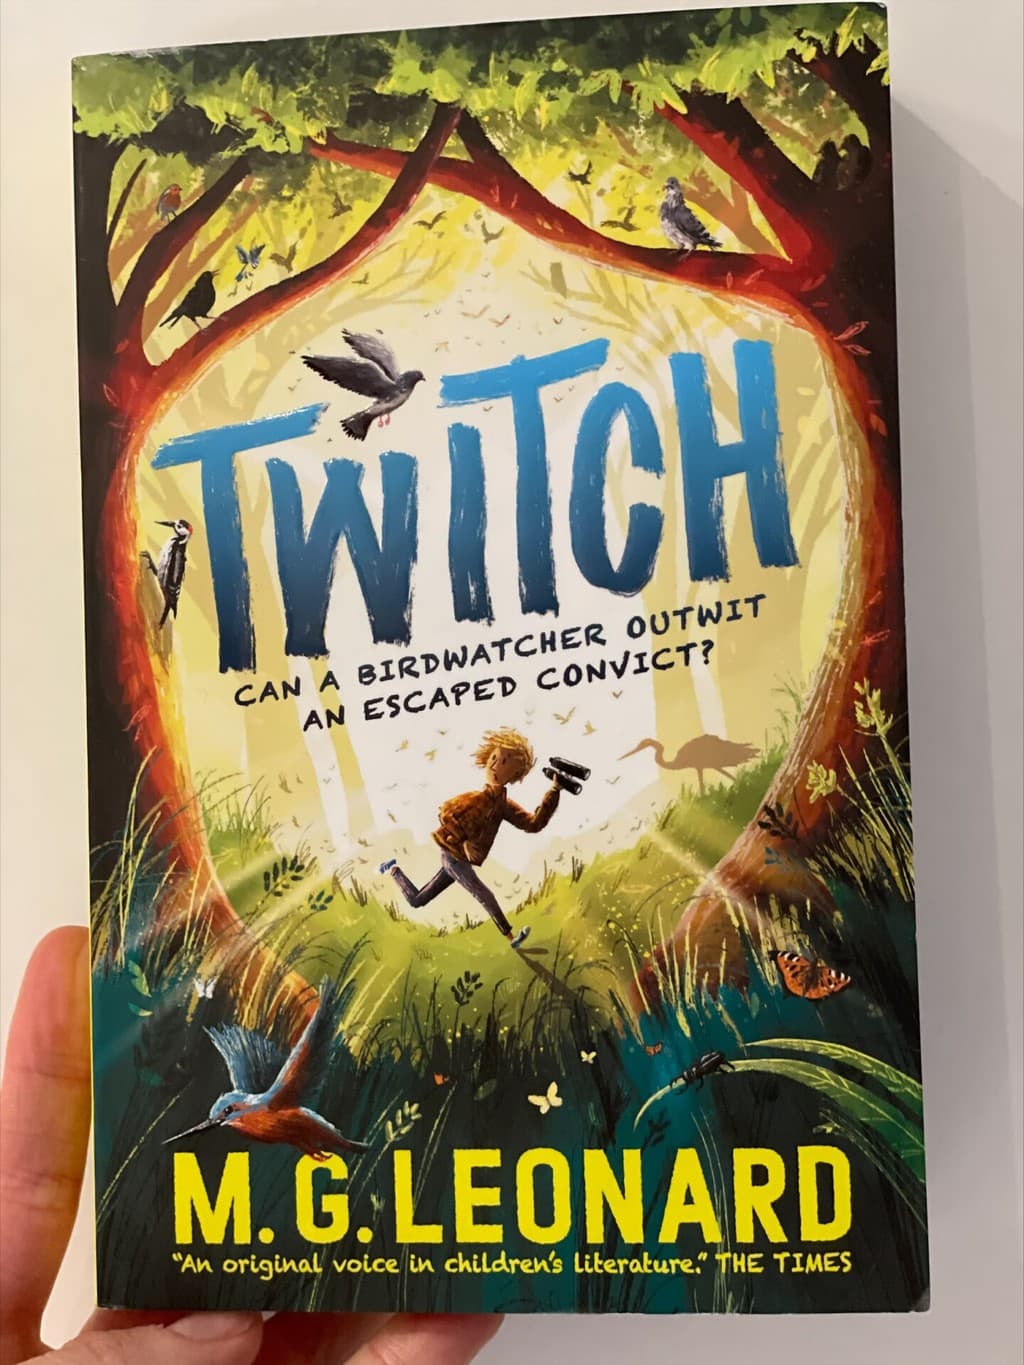 Twitch - M.G. Leonard (author), Walker Books UK Ltd (publisher), recommended reading age: 8-13 years